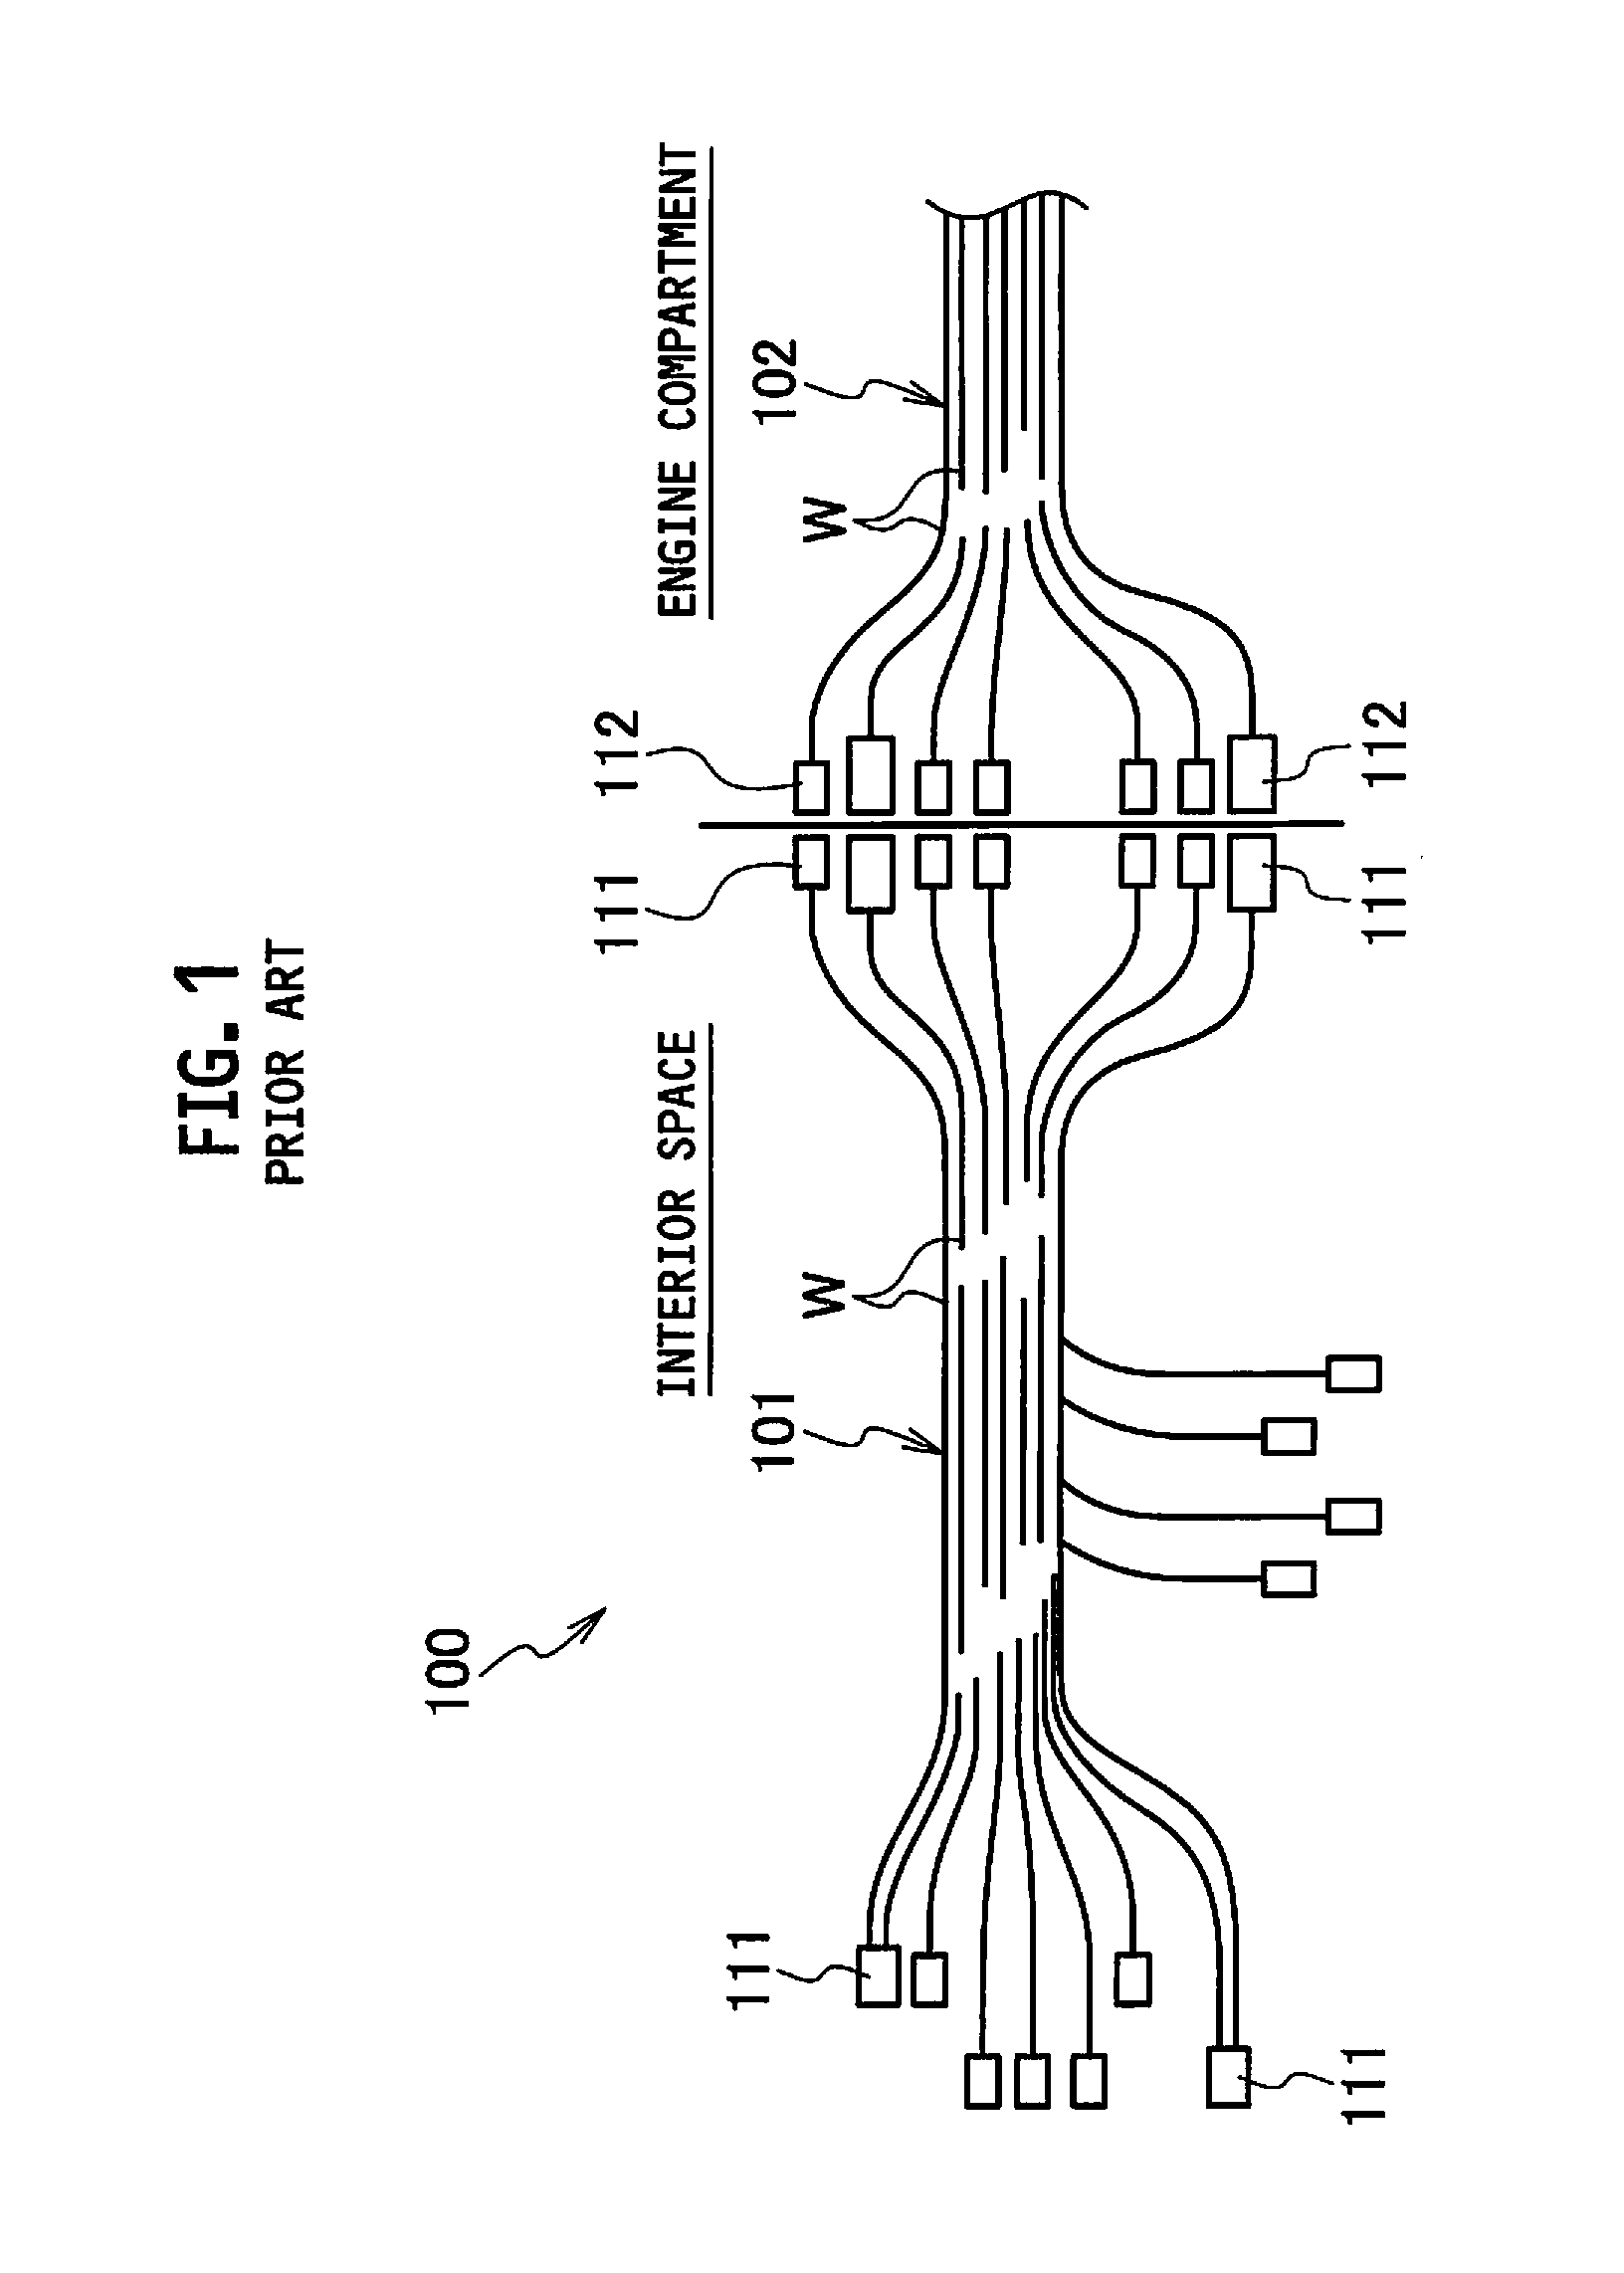 Waveguide and in-vehicle communication system